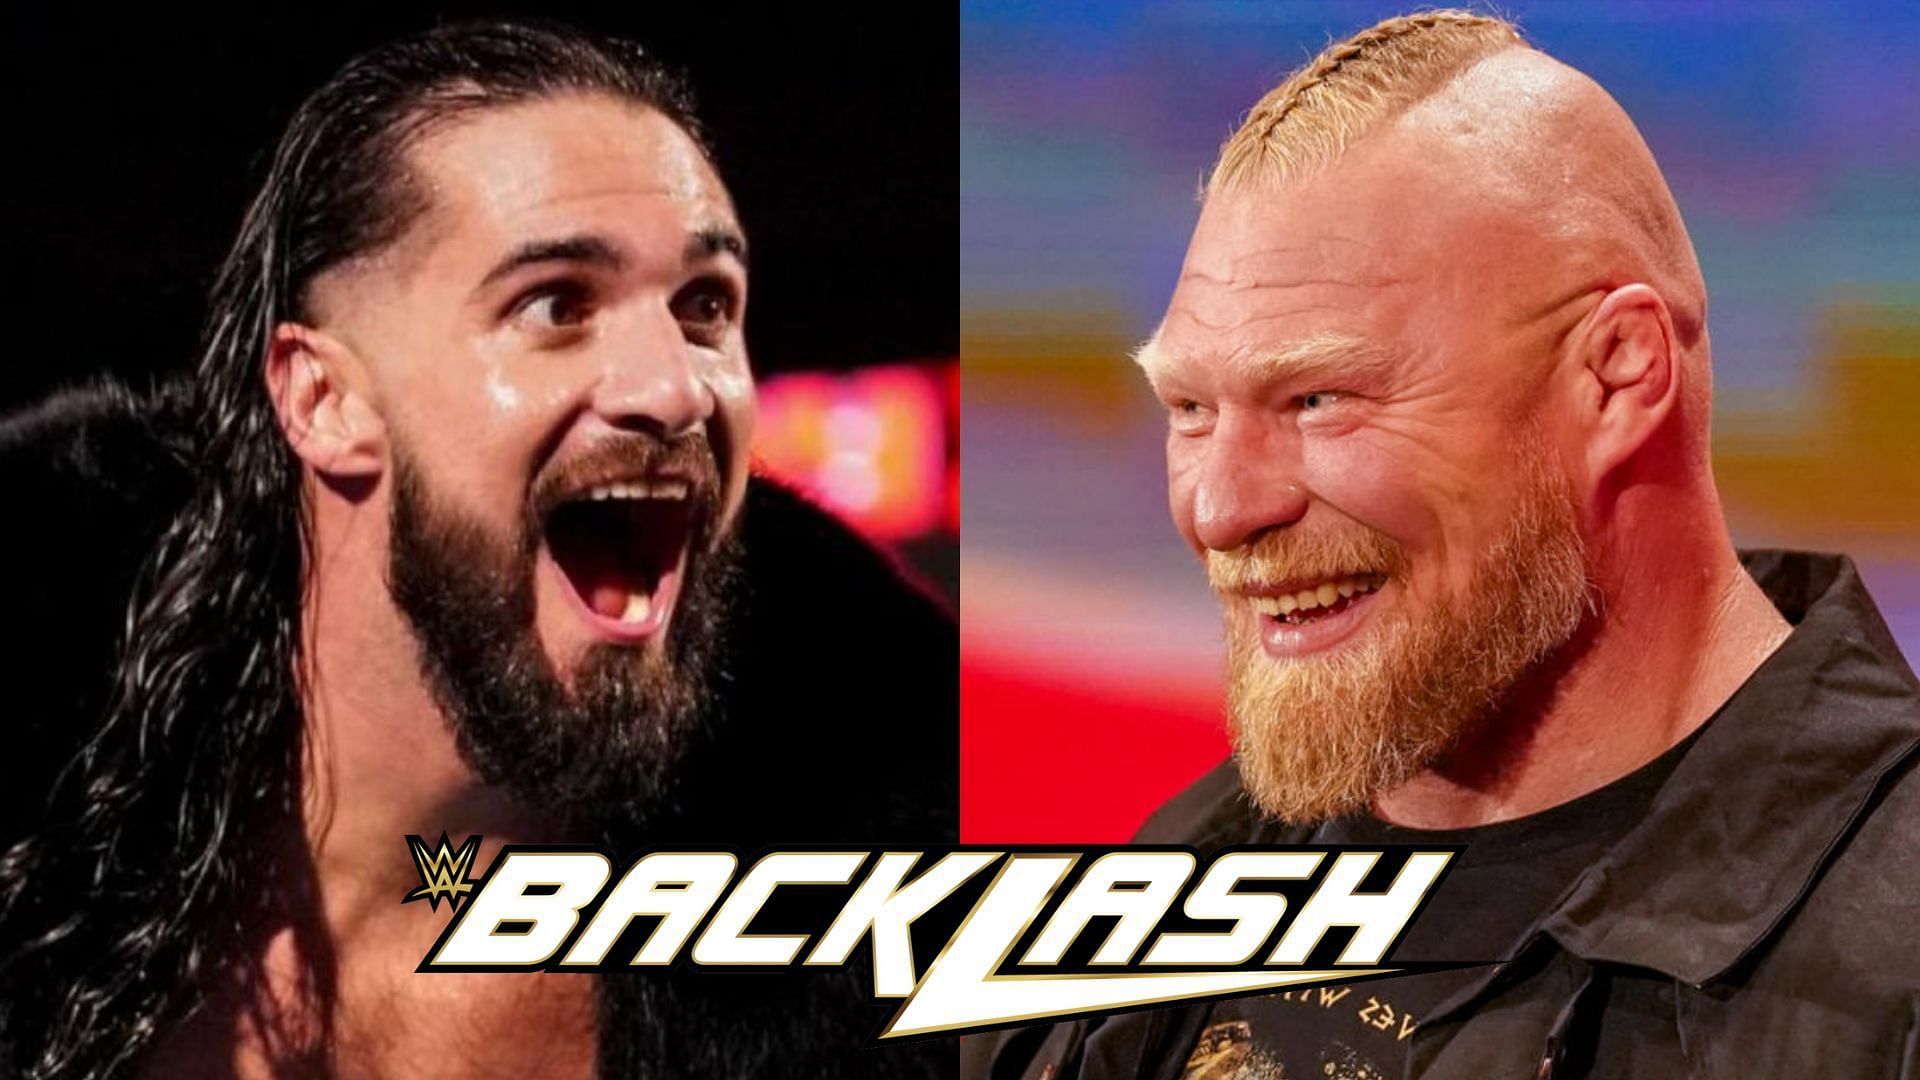 Seth Rollins and Brock Lesnar are scheduled to wrestle in Puerto Rico.